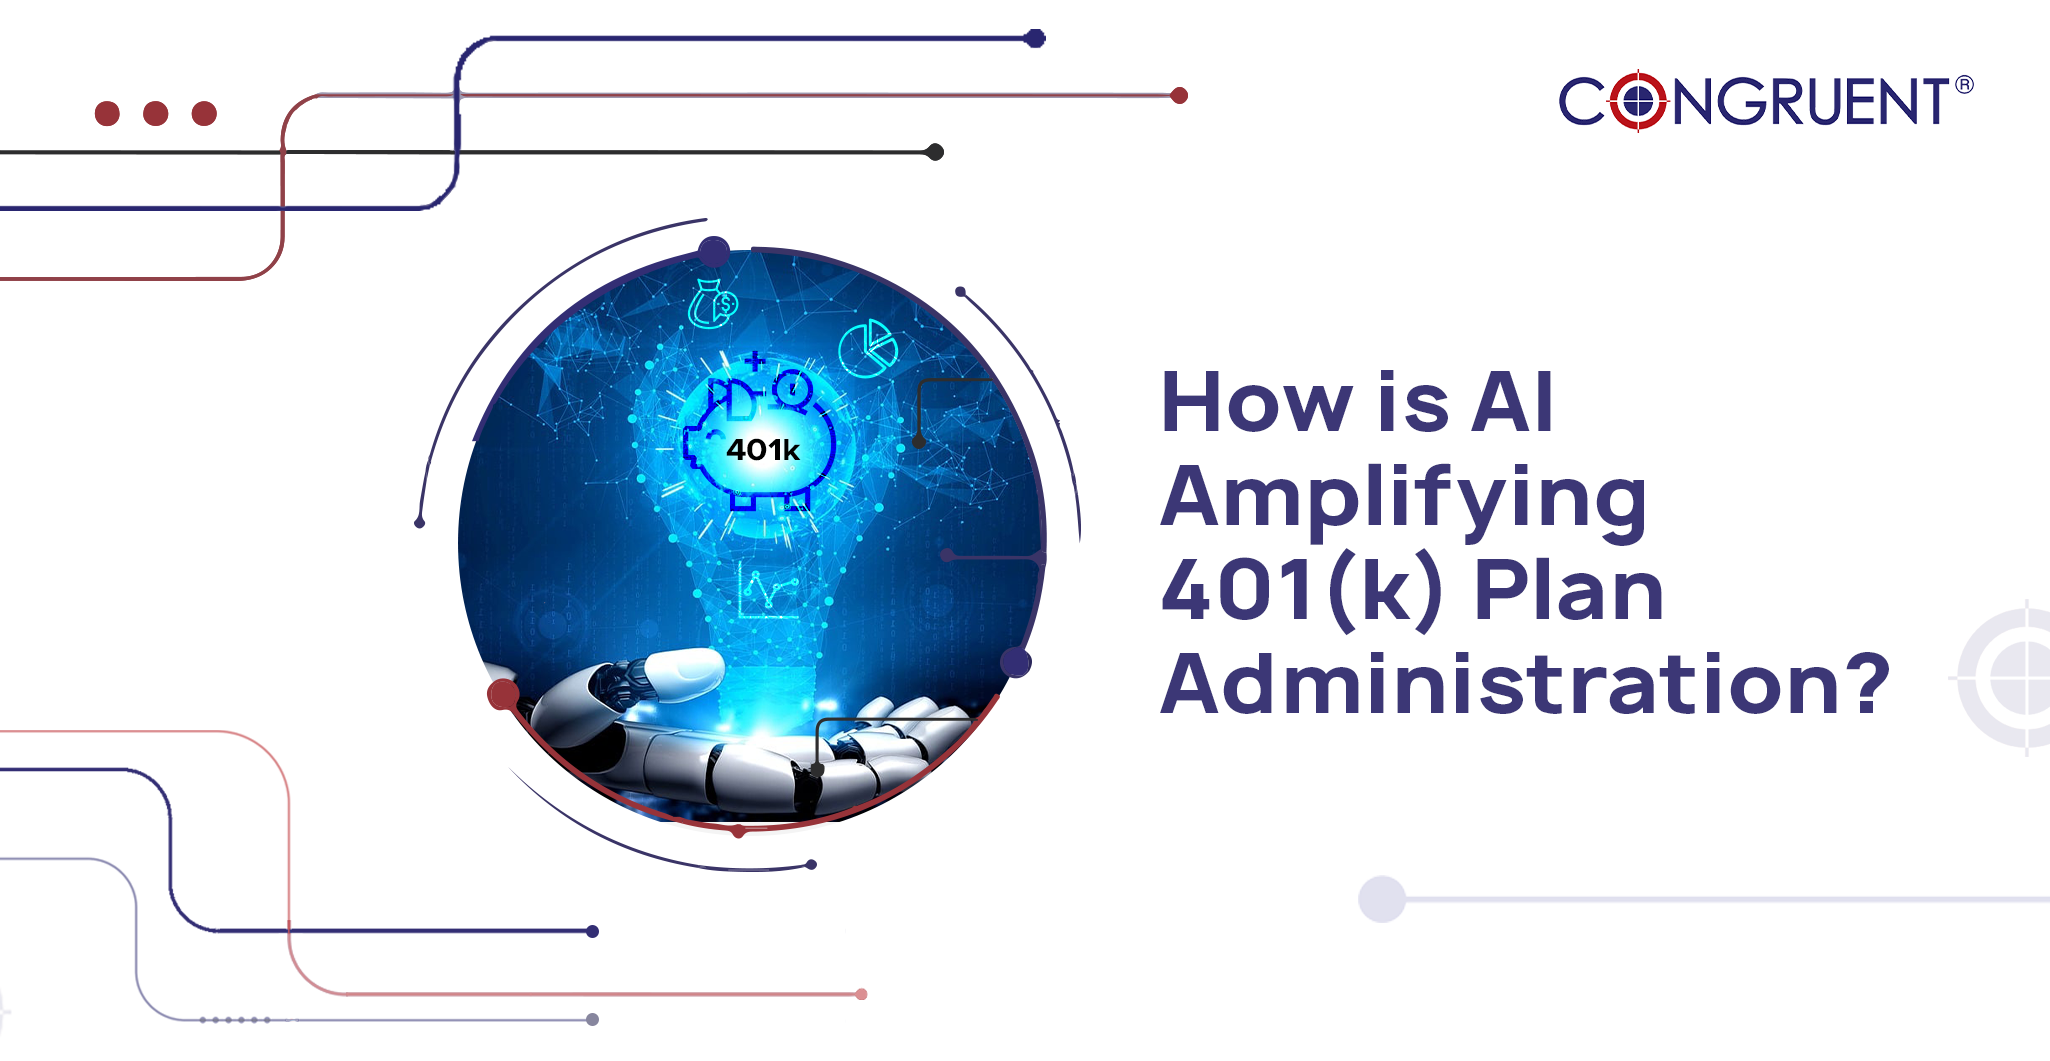 How is AI Amplifying 401(k) Plan Administration?